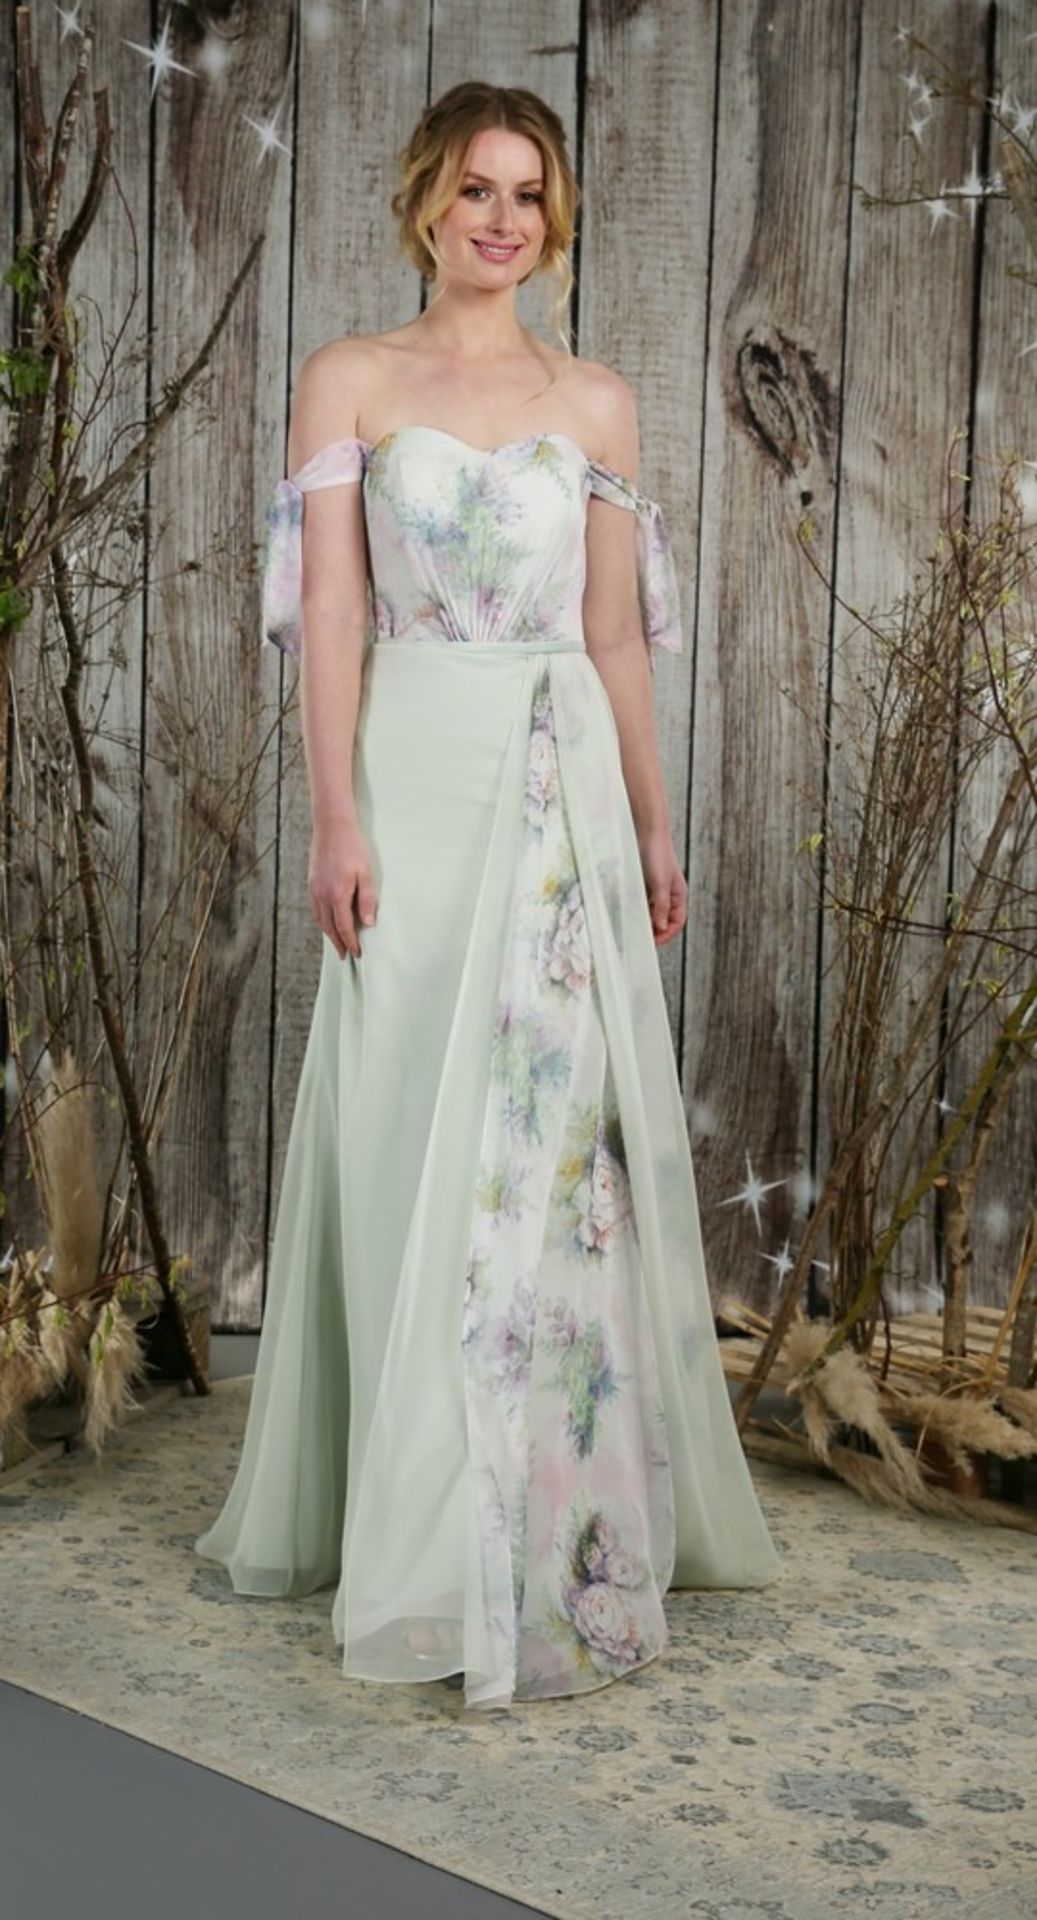 Bridesmaid Or Prom Dresses From Richard Designs Mixed Sizes and Colours. 10 Dresses - Image 5 of 9